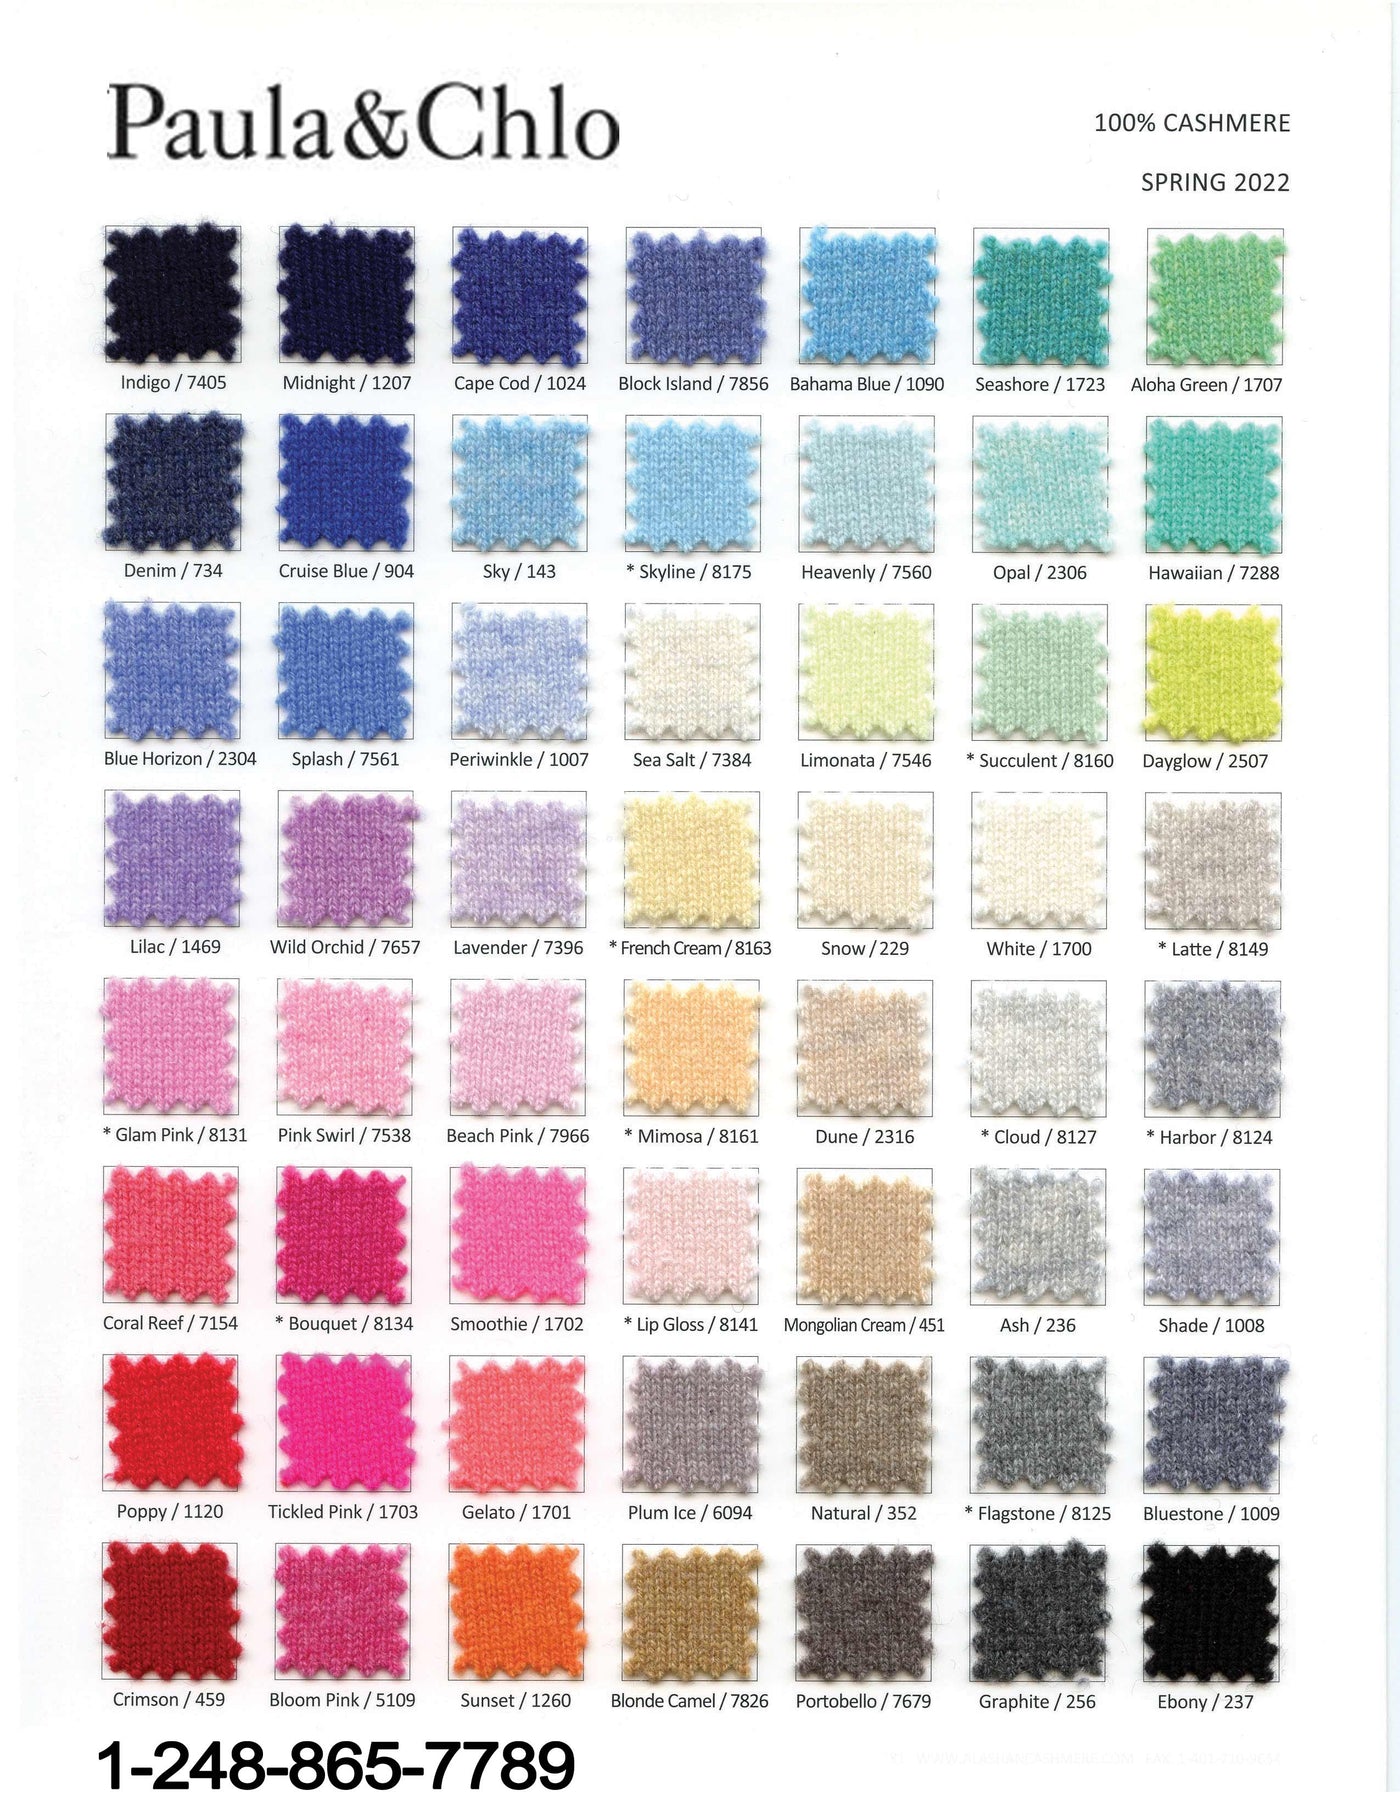 CASHMERE COLOR CARD - PAULA AND CHLO